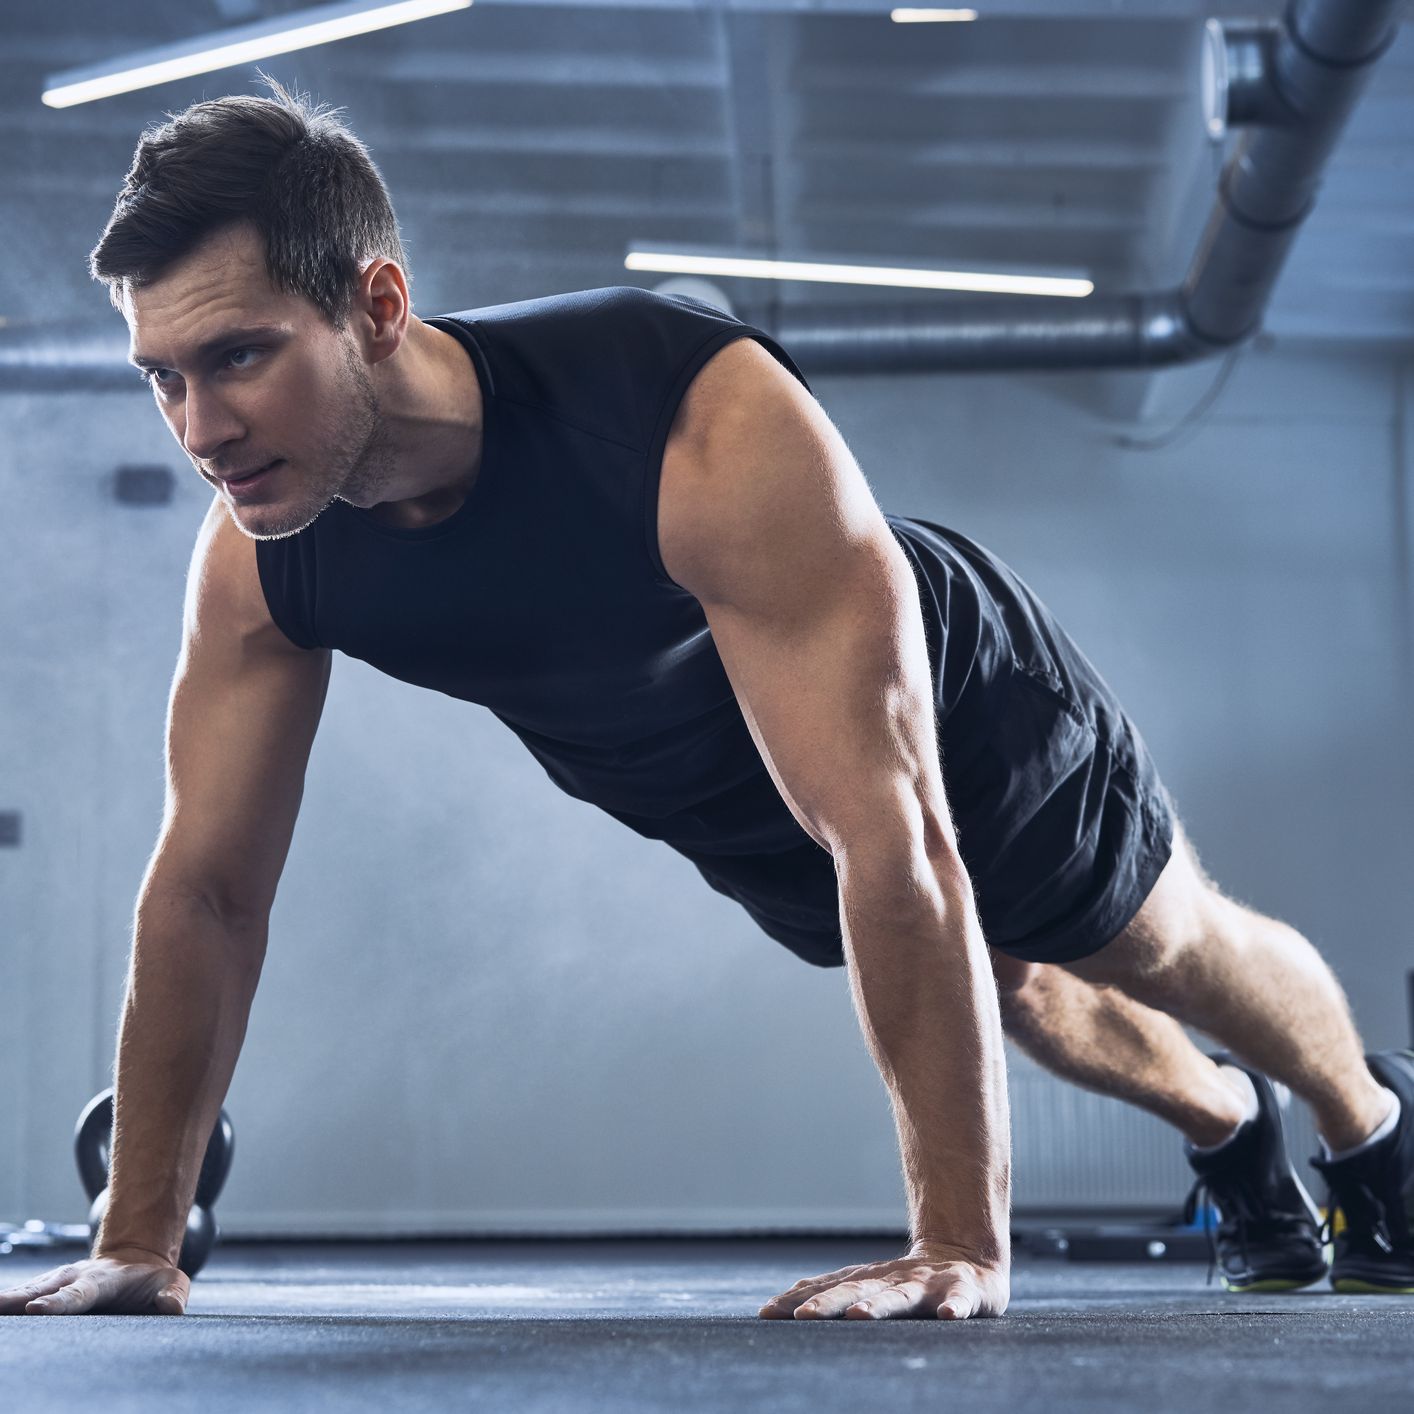 https://hips.hearstapps.com/hmg-prod/images/athletic-man-doing-pushups-exercise-at-gym-royalty-free-image-1587391897.jpg?crop=0.66714xw:1xh;center,top&resize=2048:*